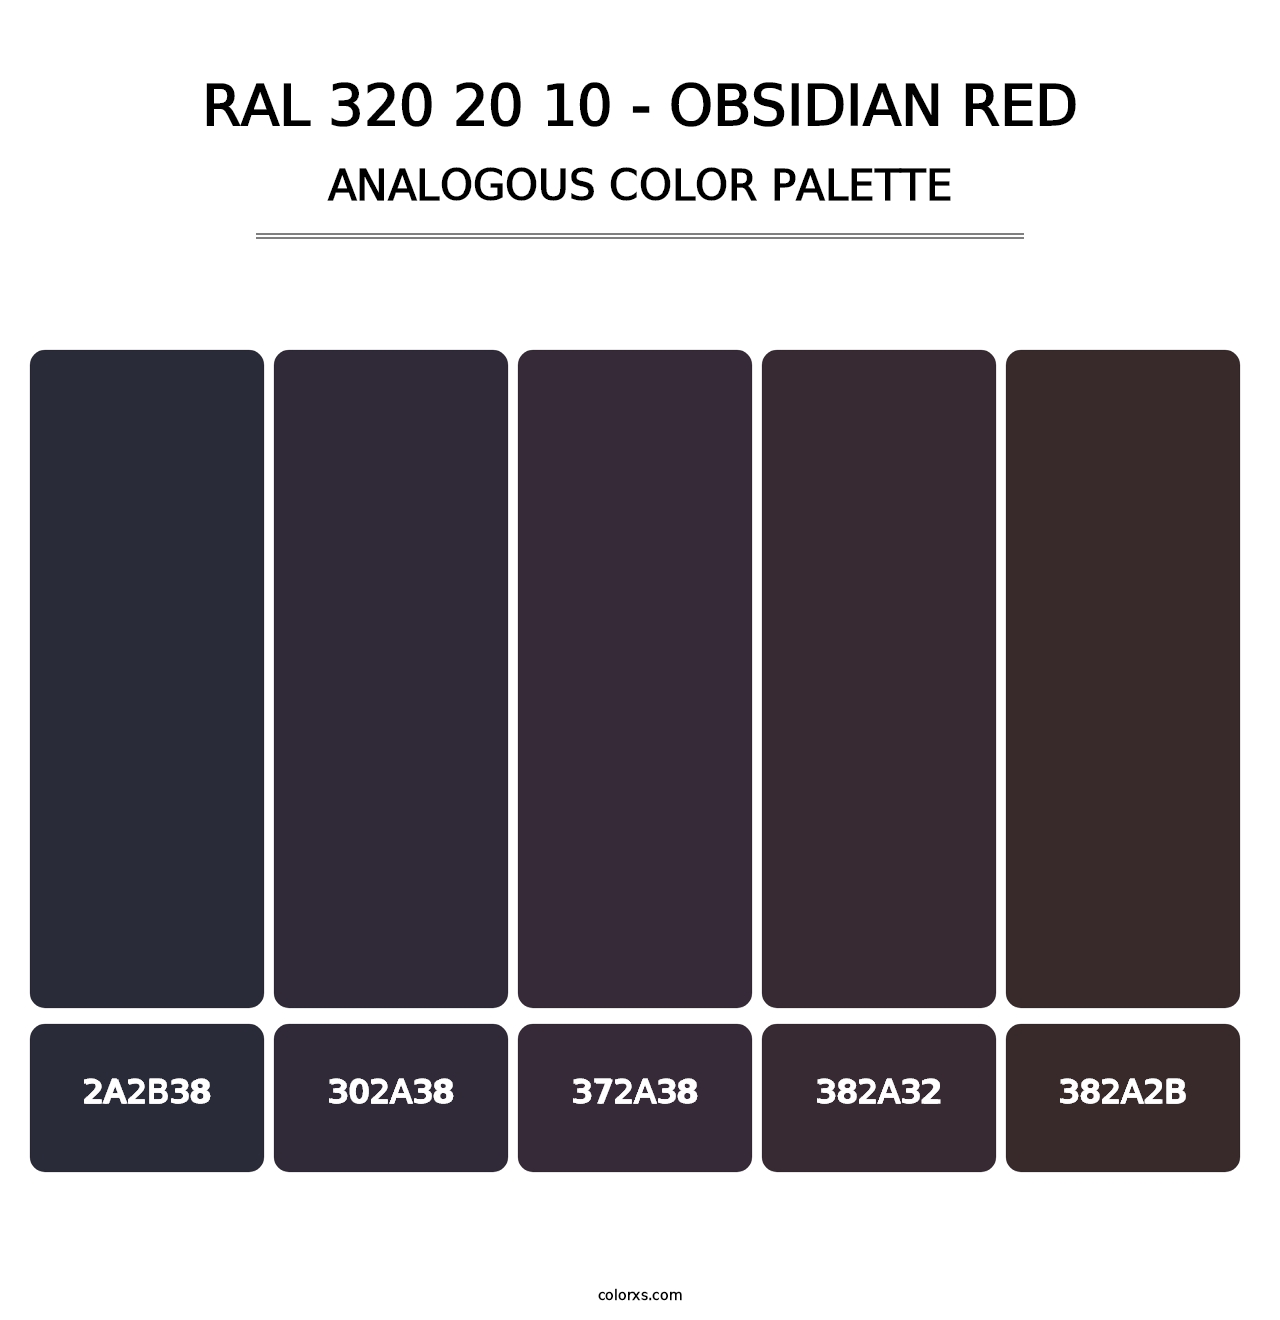 RAL 320 20 10 - Obsidian Red - Analogous Color Palette